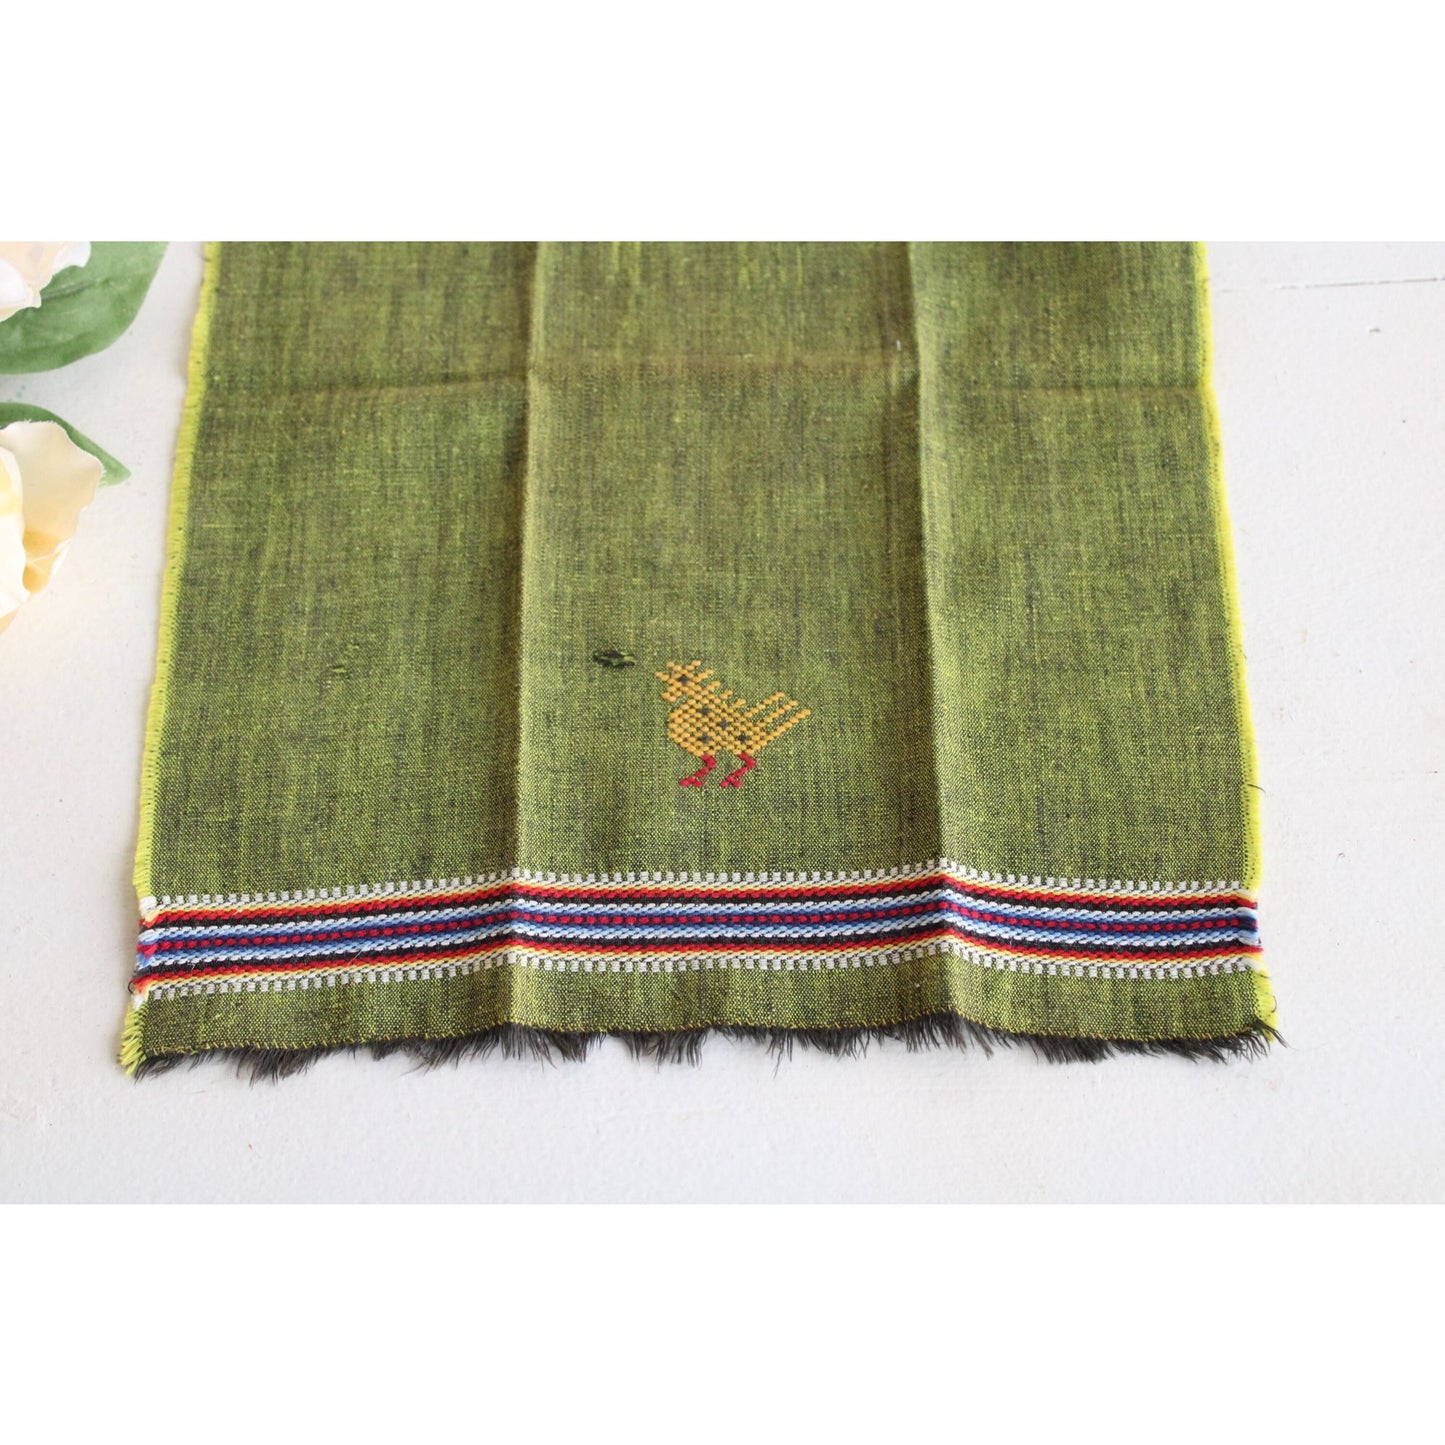 Vintage 1960s Green Linen Fingertip Towel with Embroidered Chicken and Fringe